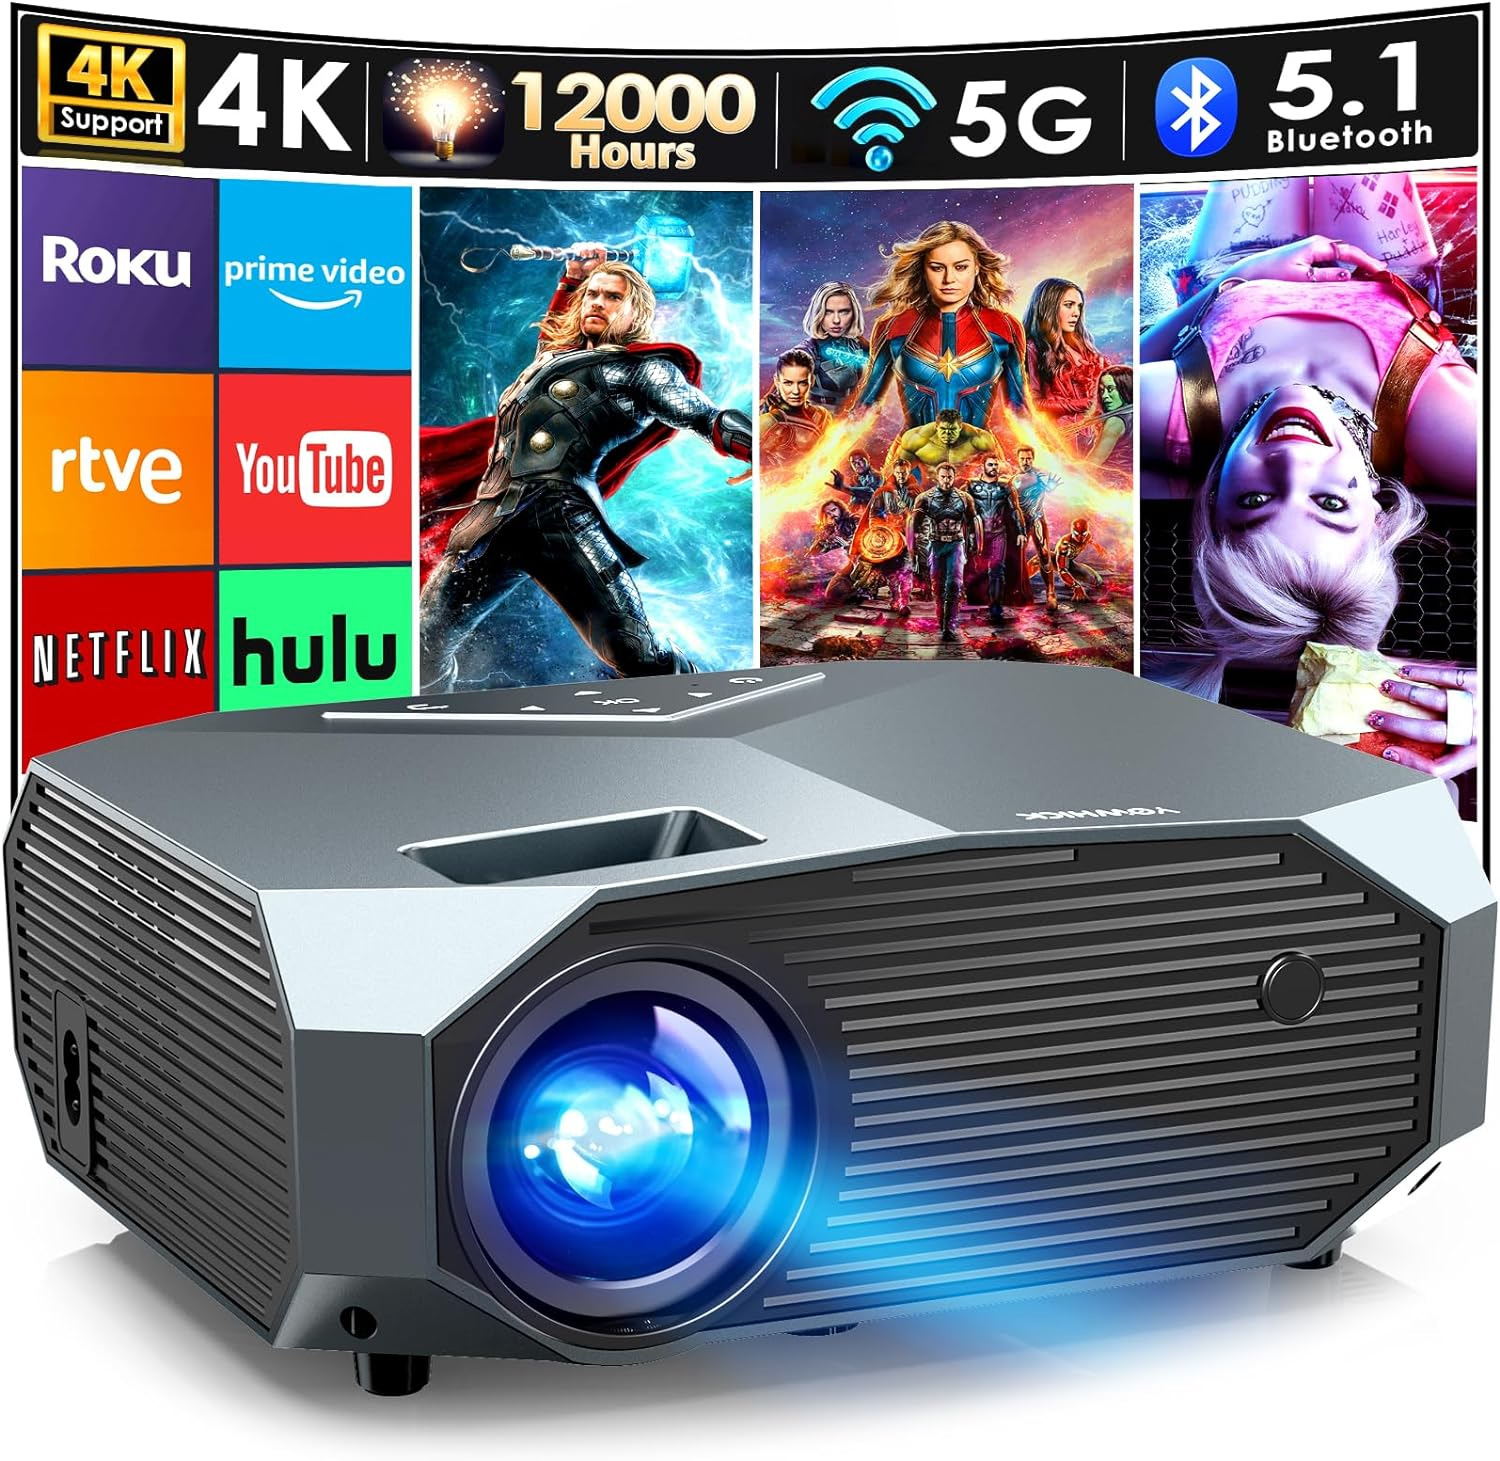 Video Movie Projector 5G Wifi Bluetooth 1080P Outdoor Portable 4K Home Theater 